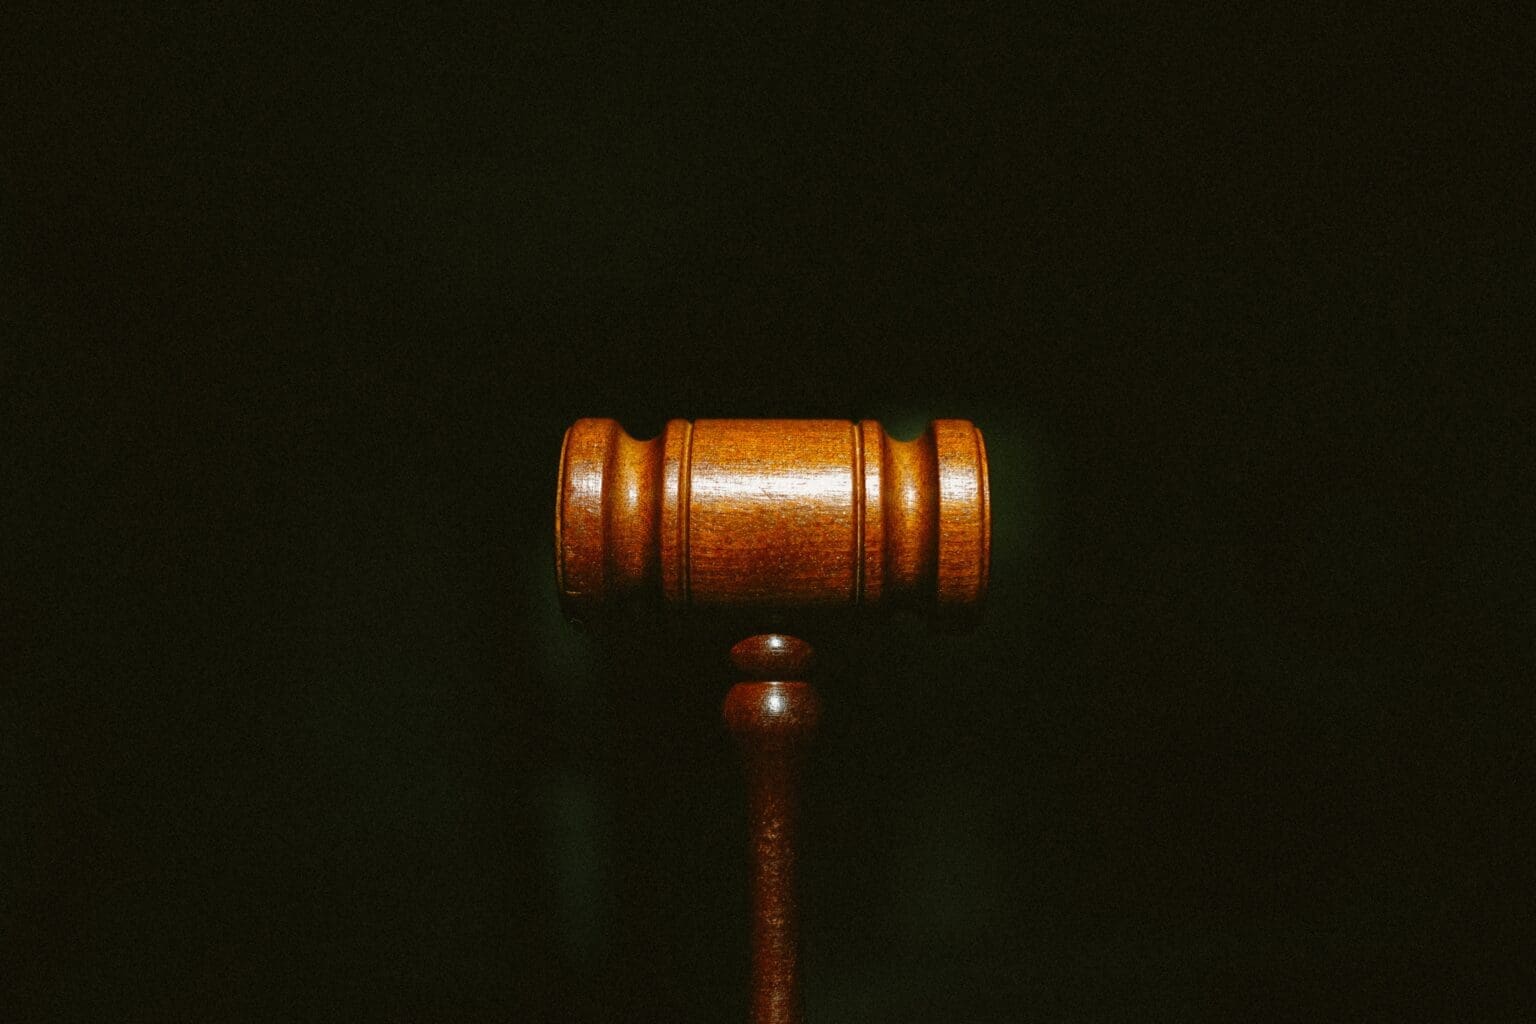 Small law gavel on black background